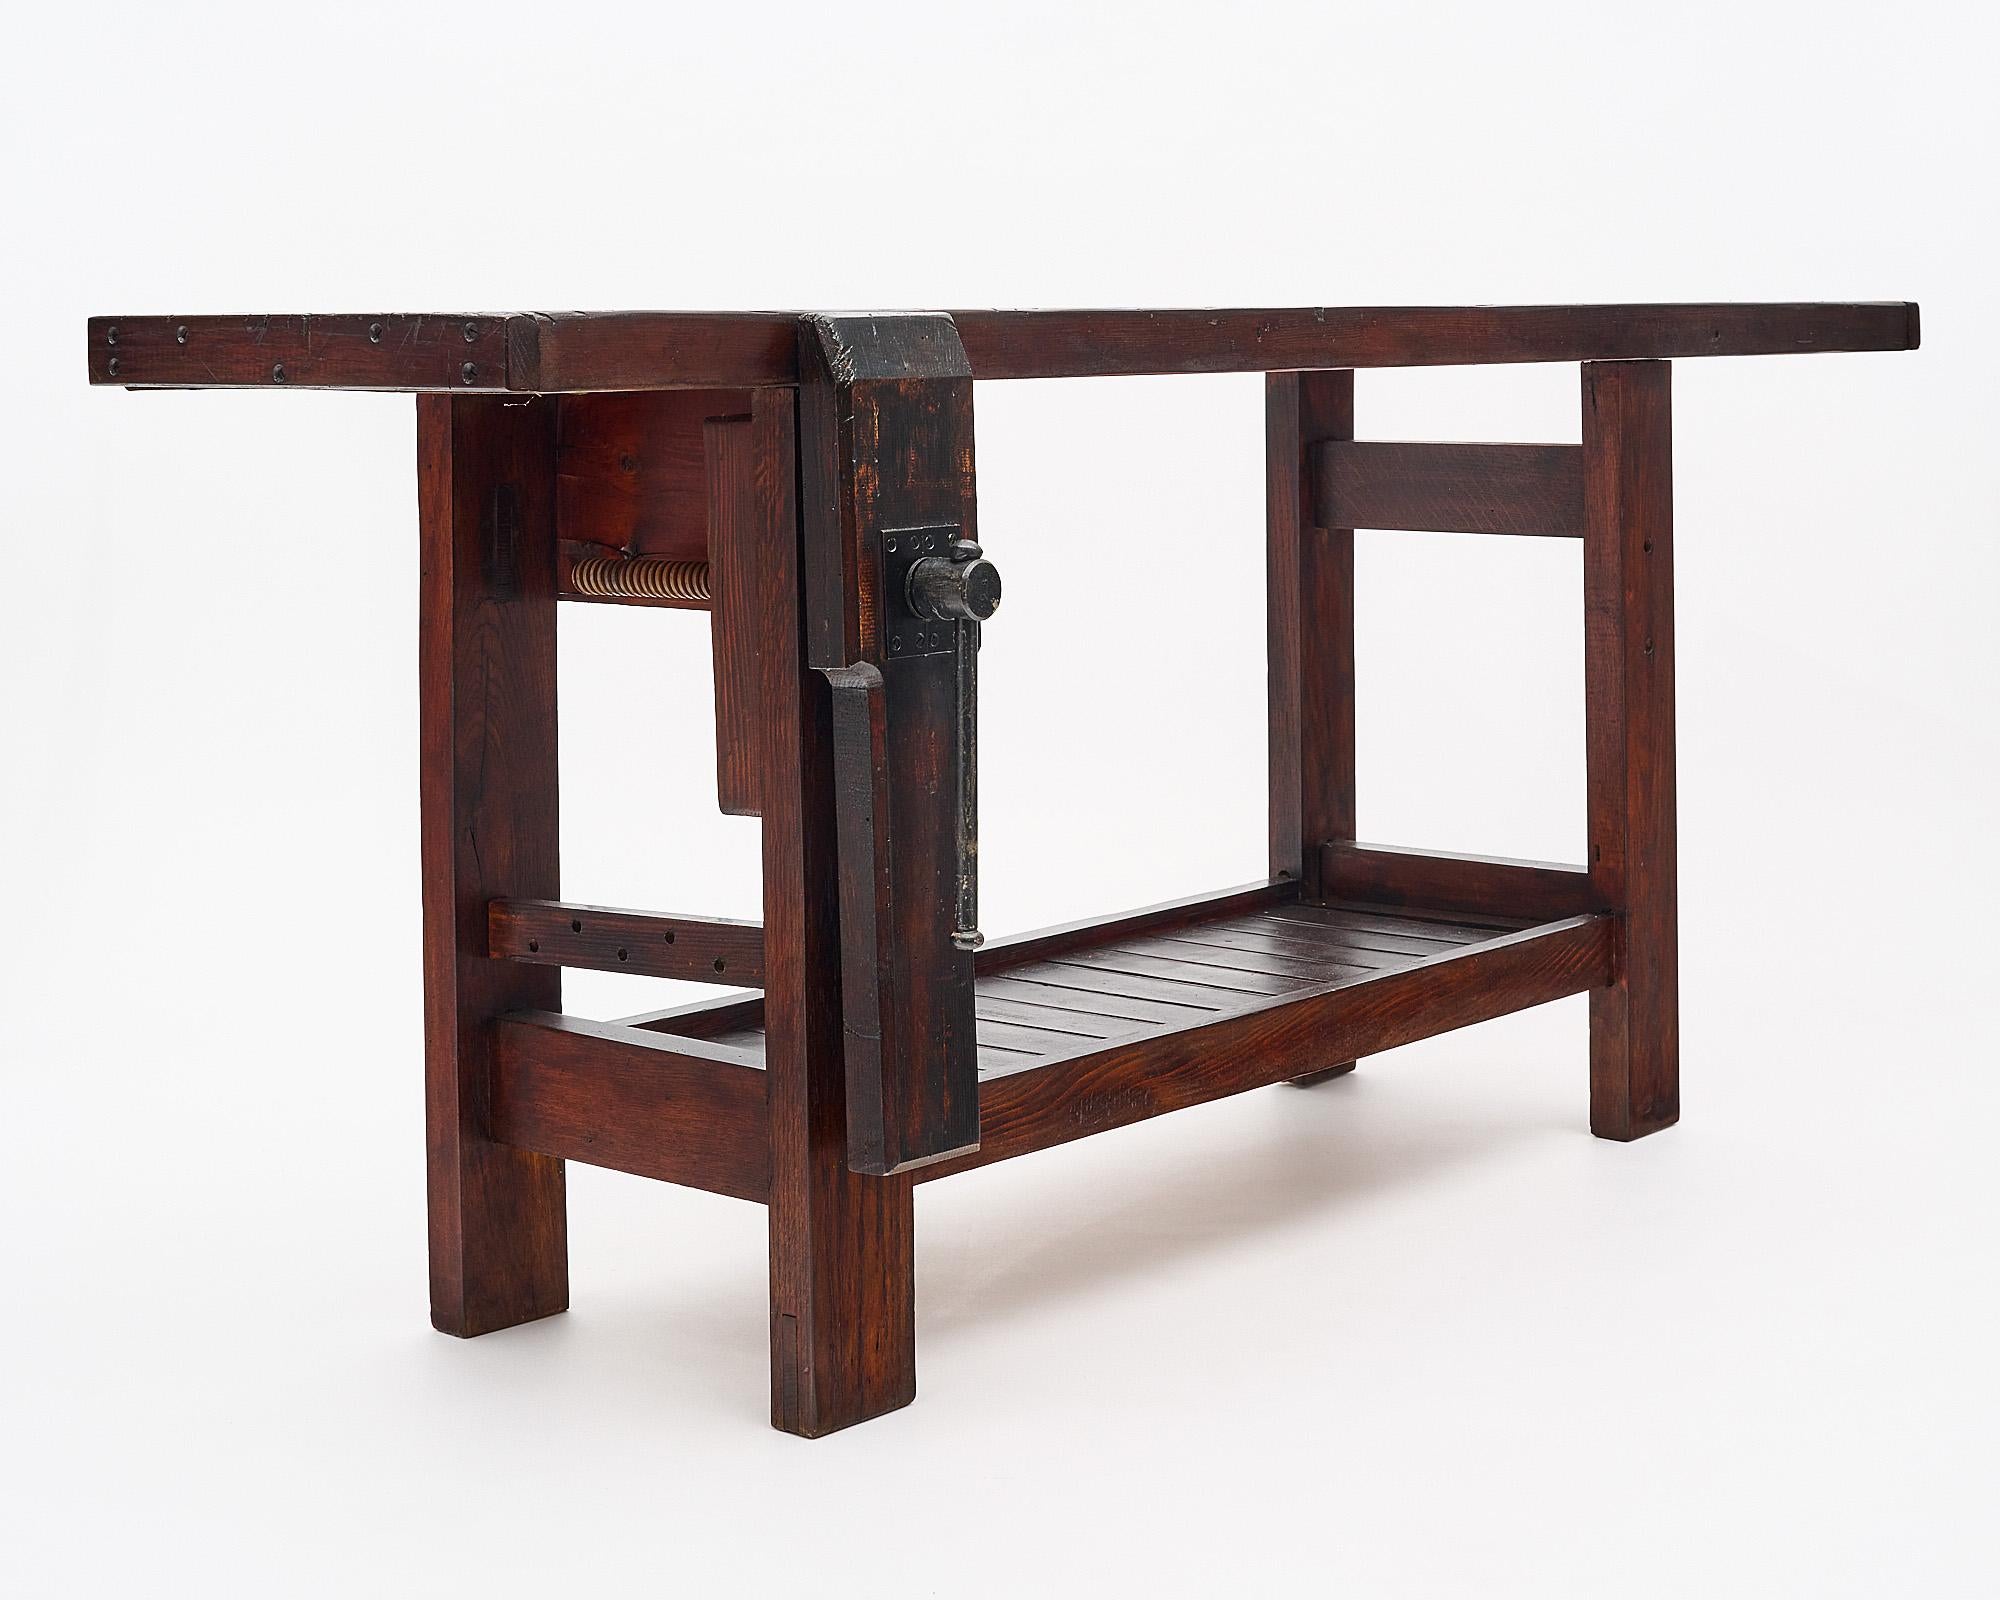 Workbench, French, made of stained and waxed wood. This piece features a shelf and the original vise. The depth listed includes the vise for a full depth, the depth of just the top is 18”.

